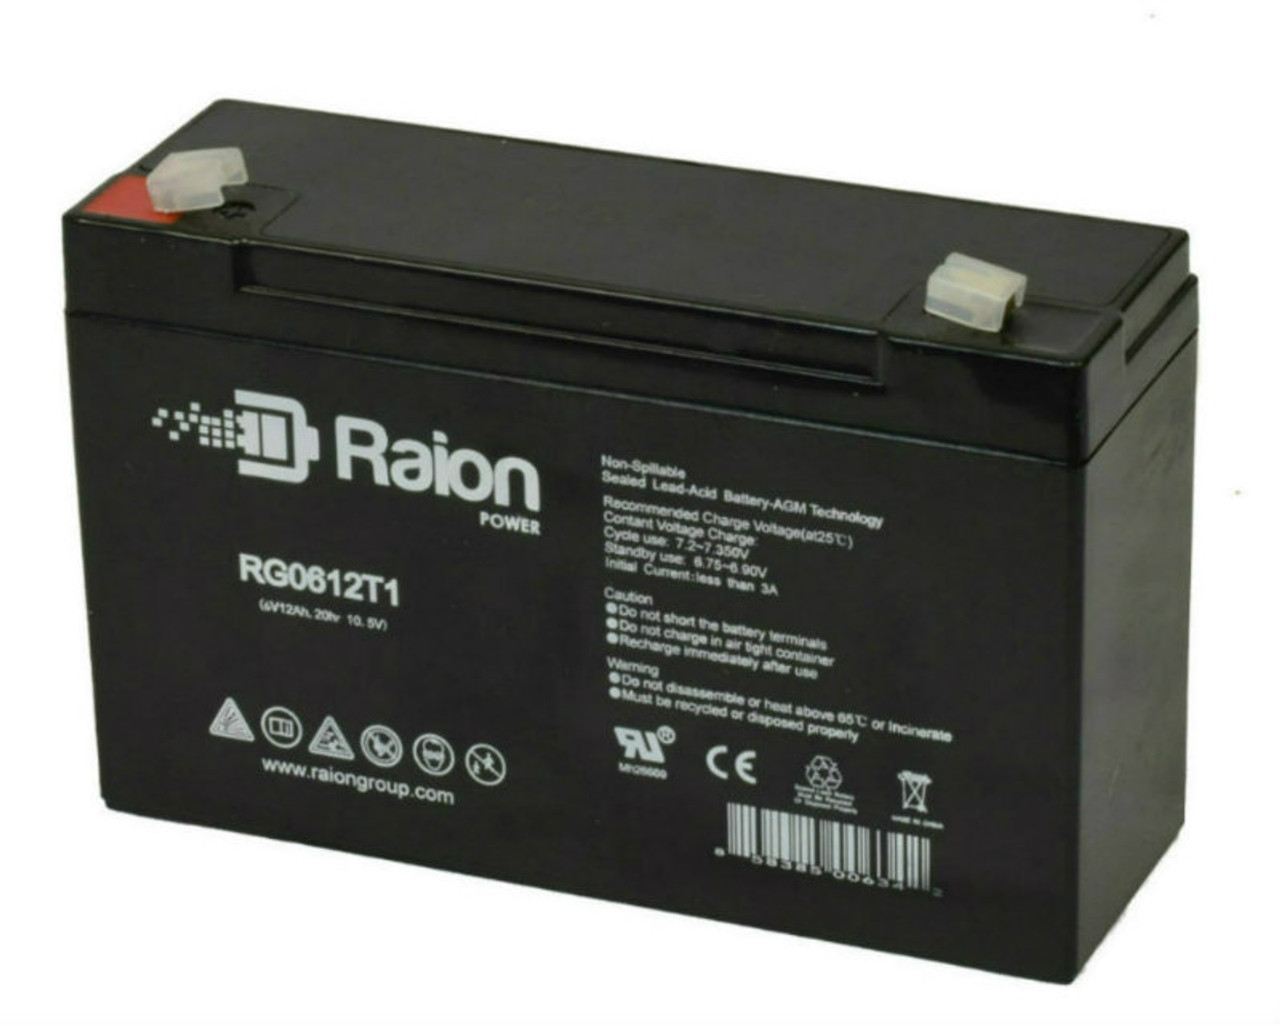 Raion Power RG06120T1 Replacement Battery for Baxter Healthcare 6000 Flo-Gard Infusion Pump Medical Equipment